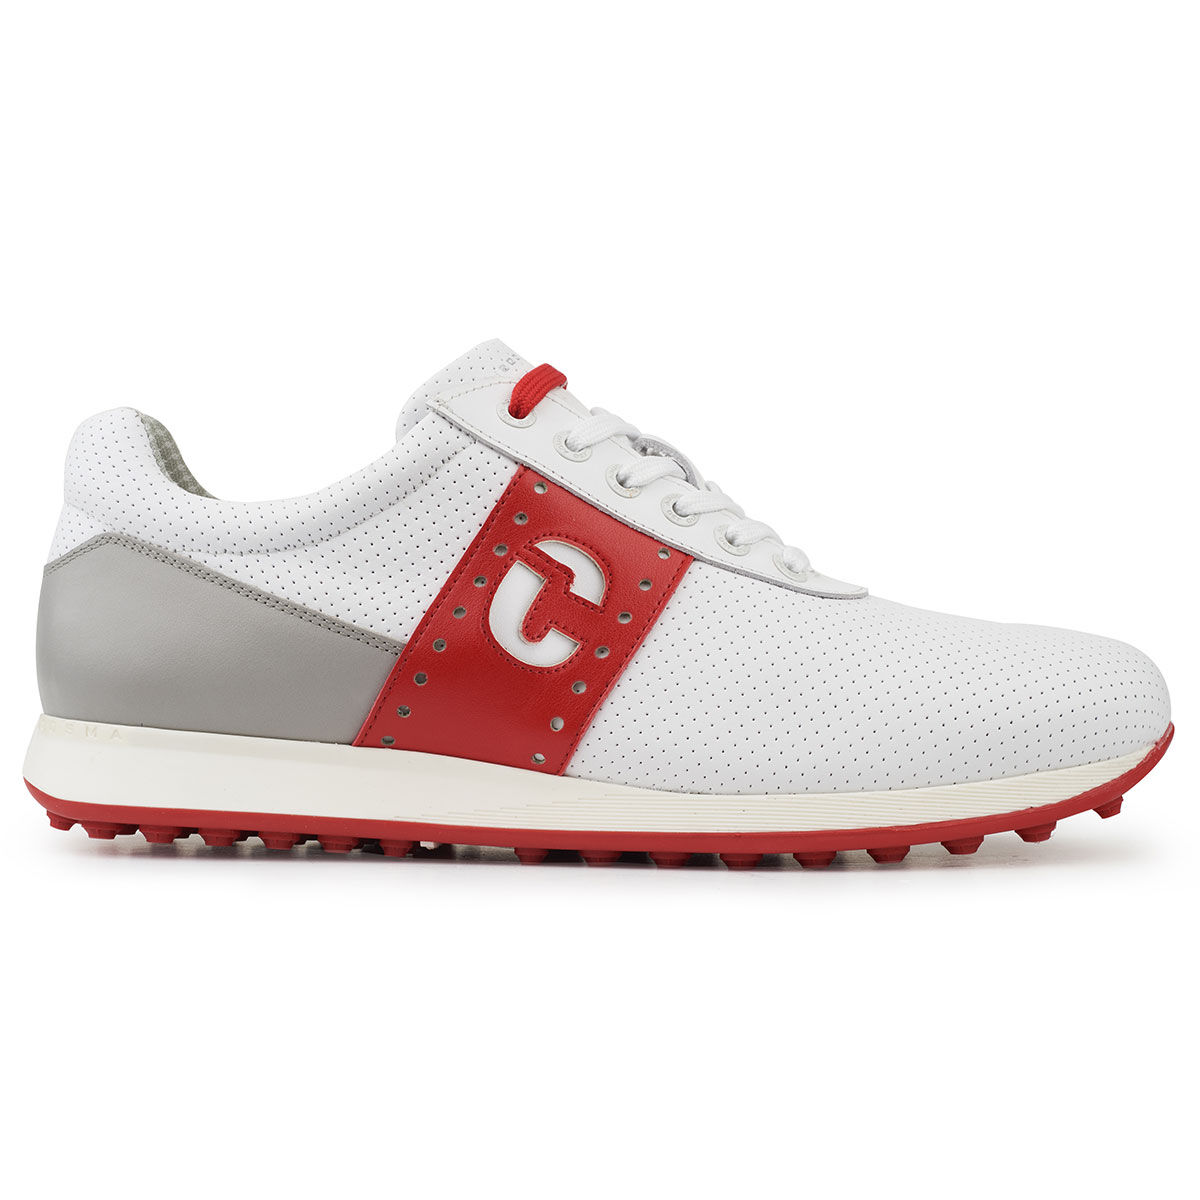 Duca Del Cosma Men's White, Grey and Red Belair Waterproof Spikeless Golf Shoes, Size: 11 | American Golf von Duca Del Cosma